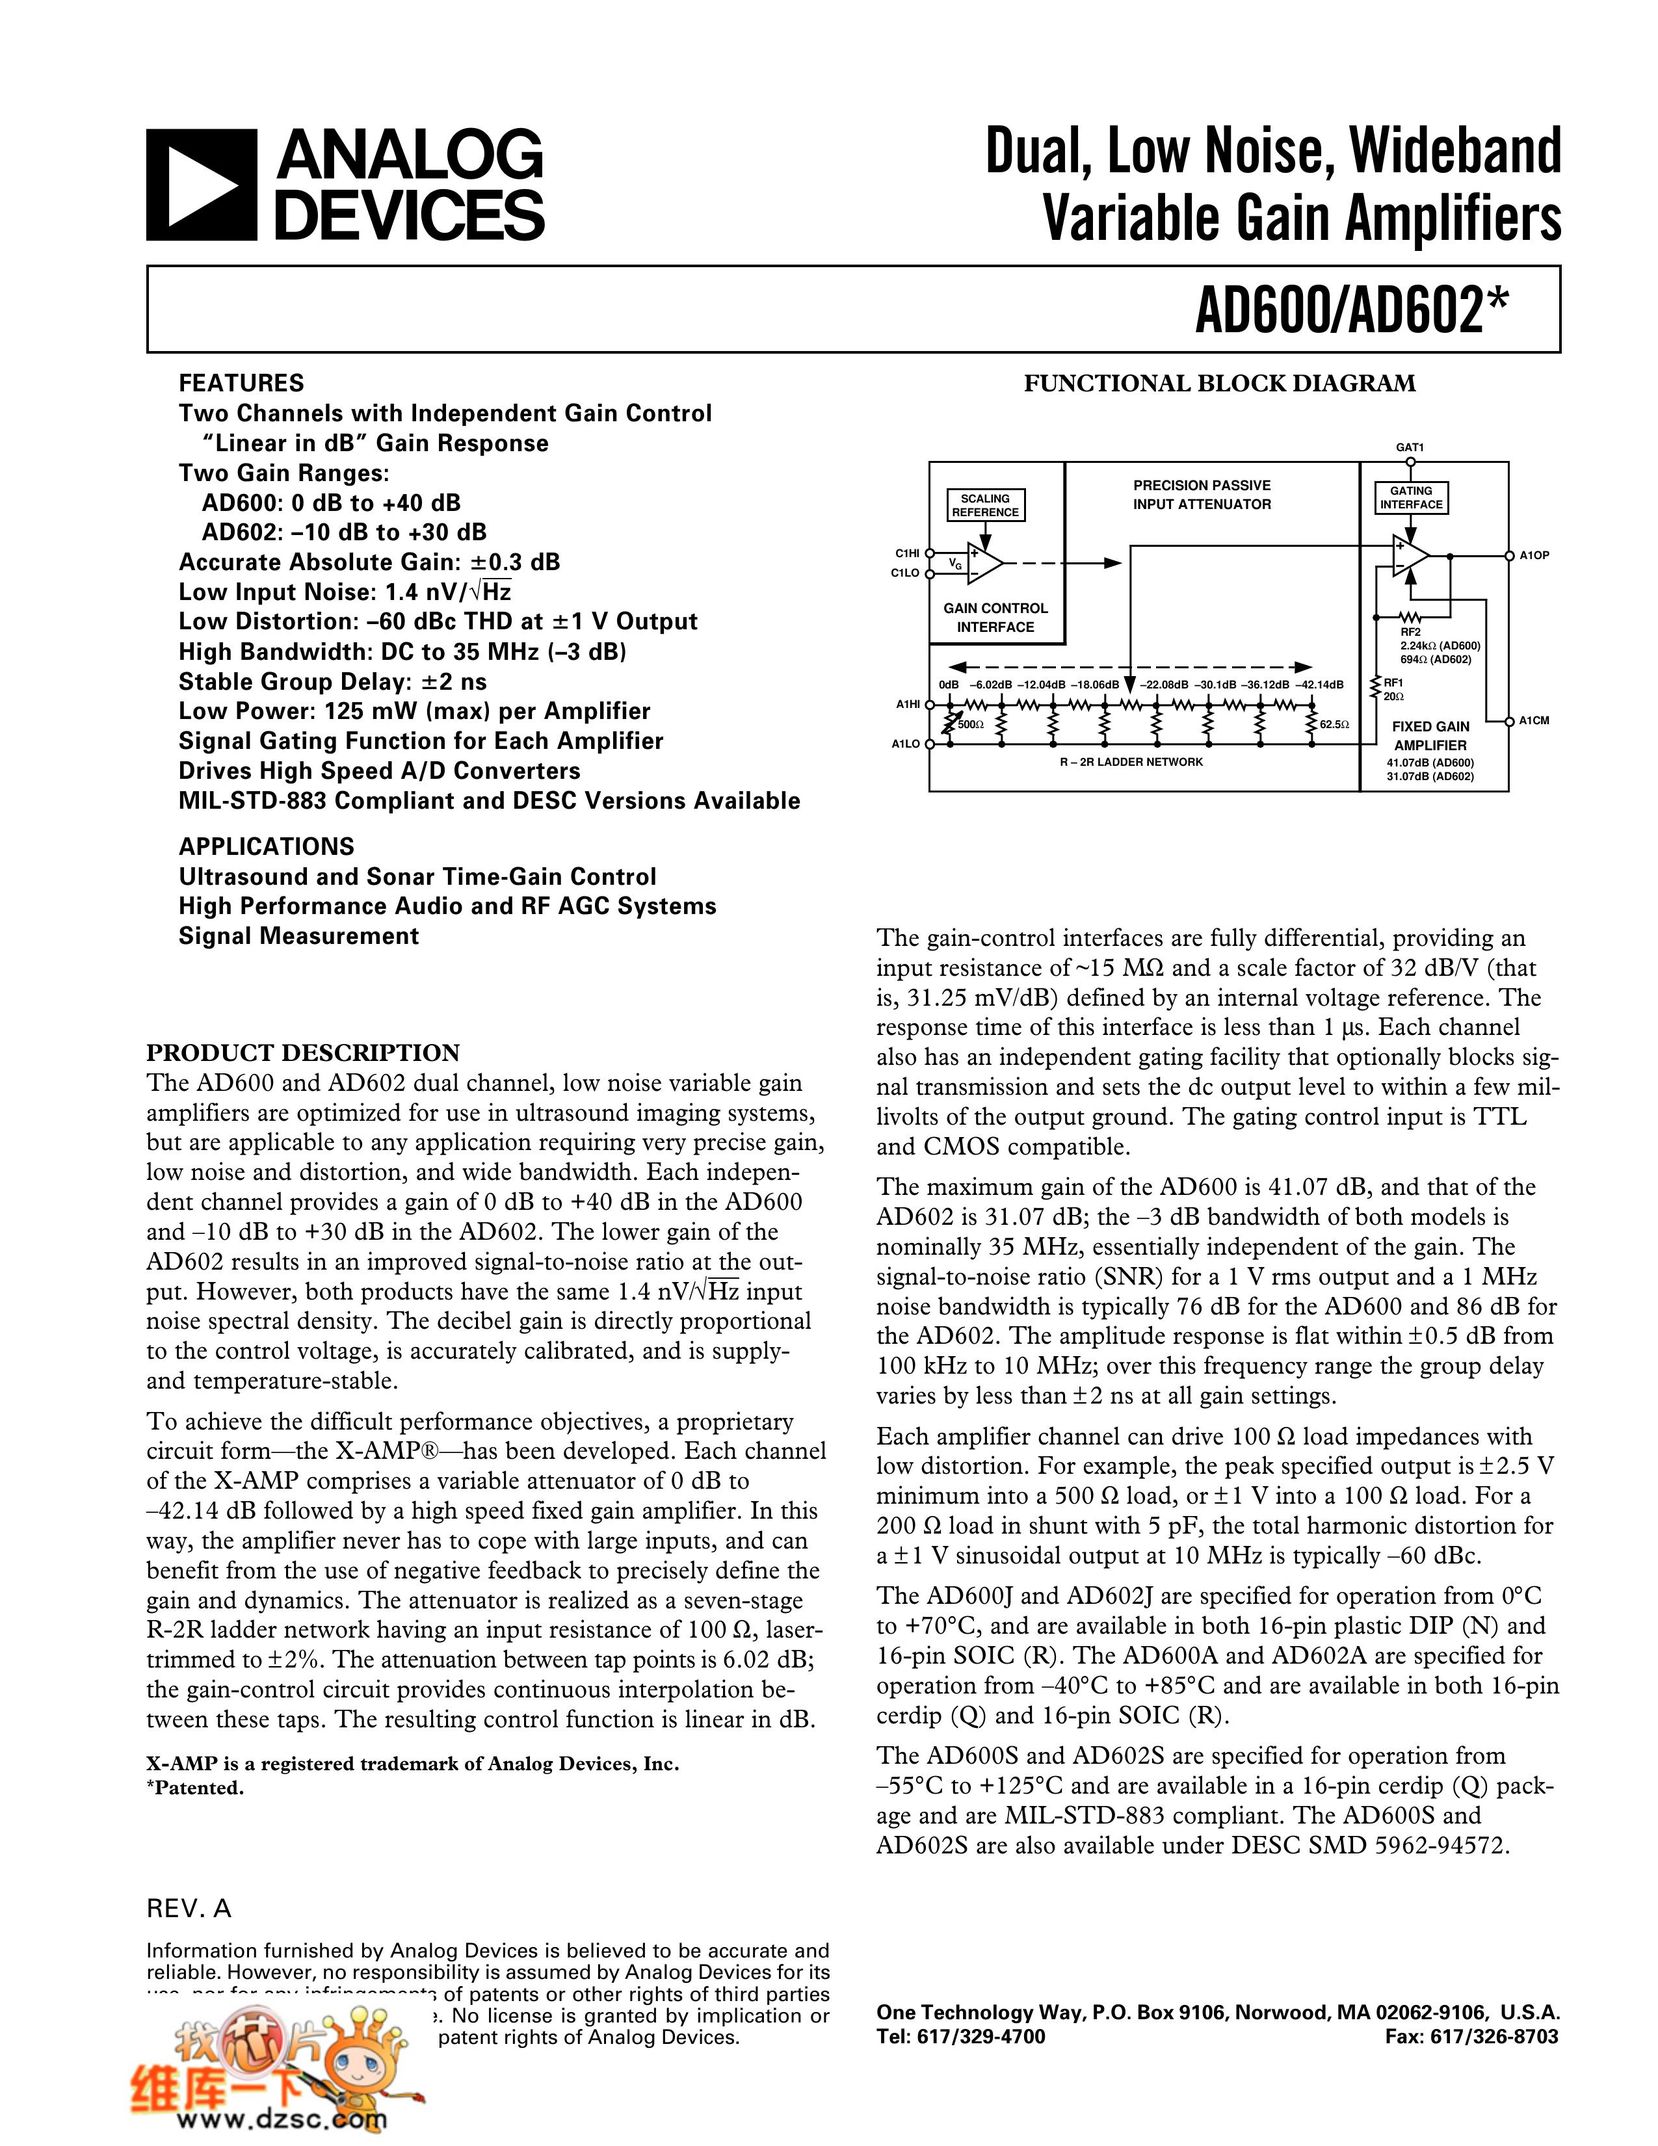 Analog Devices AD602 Cooktop User Manual